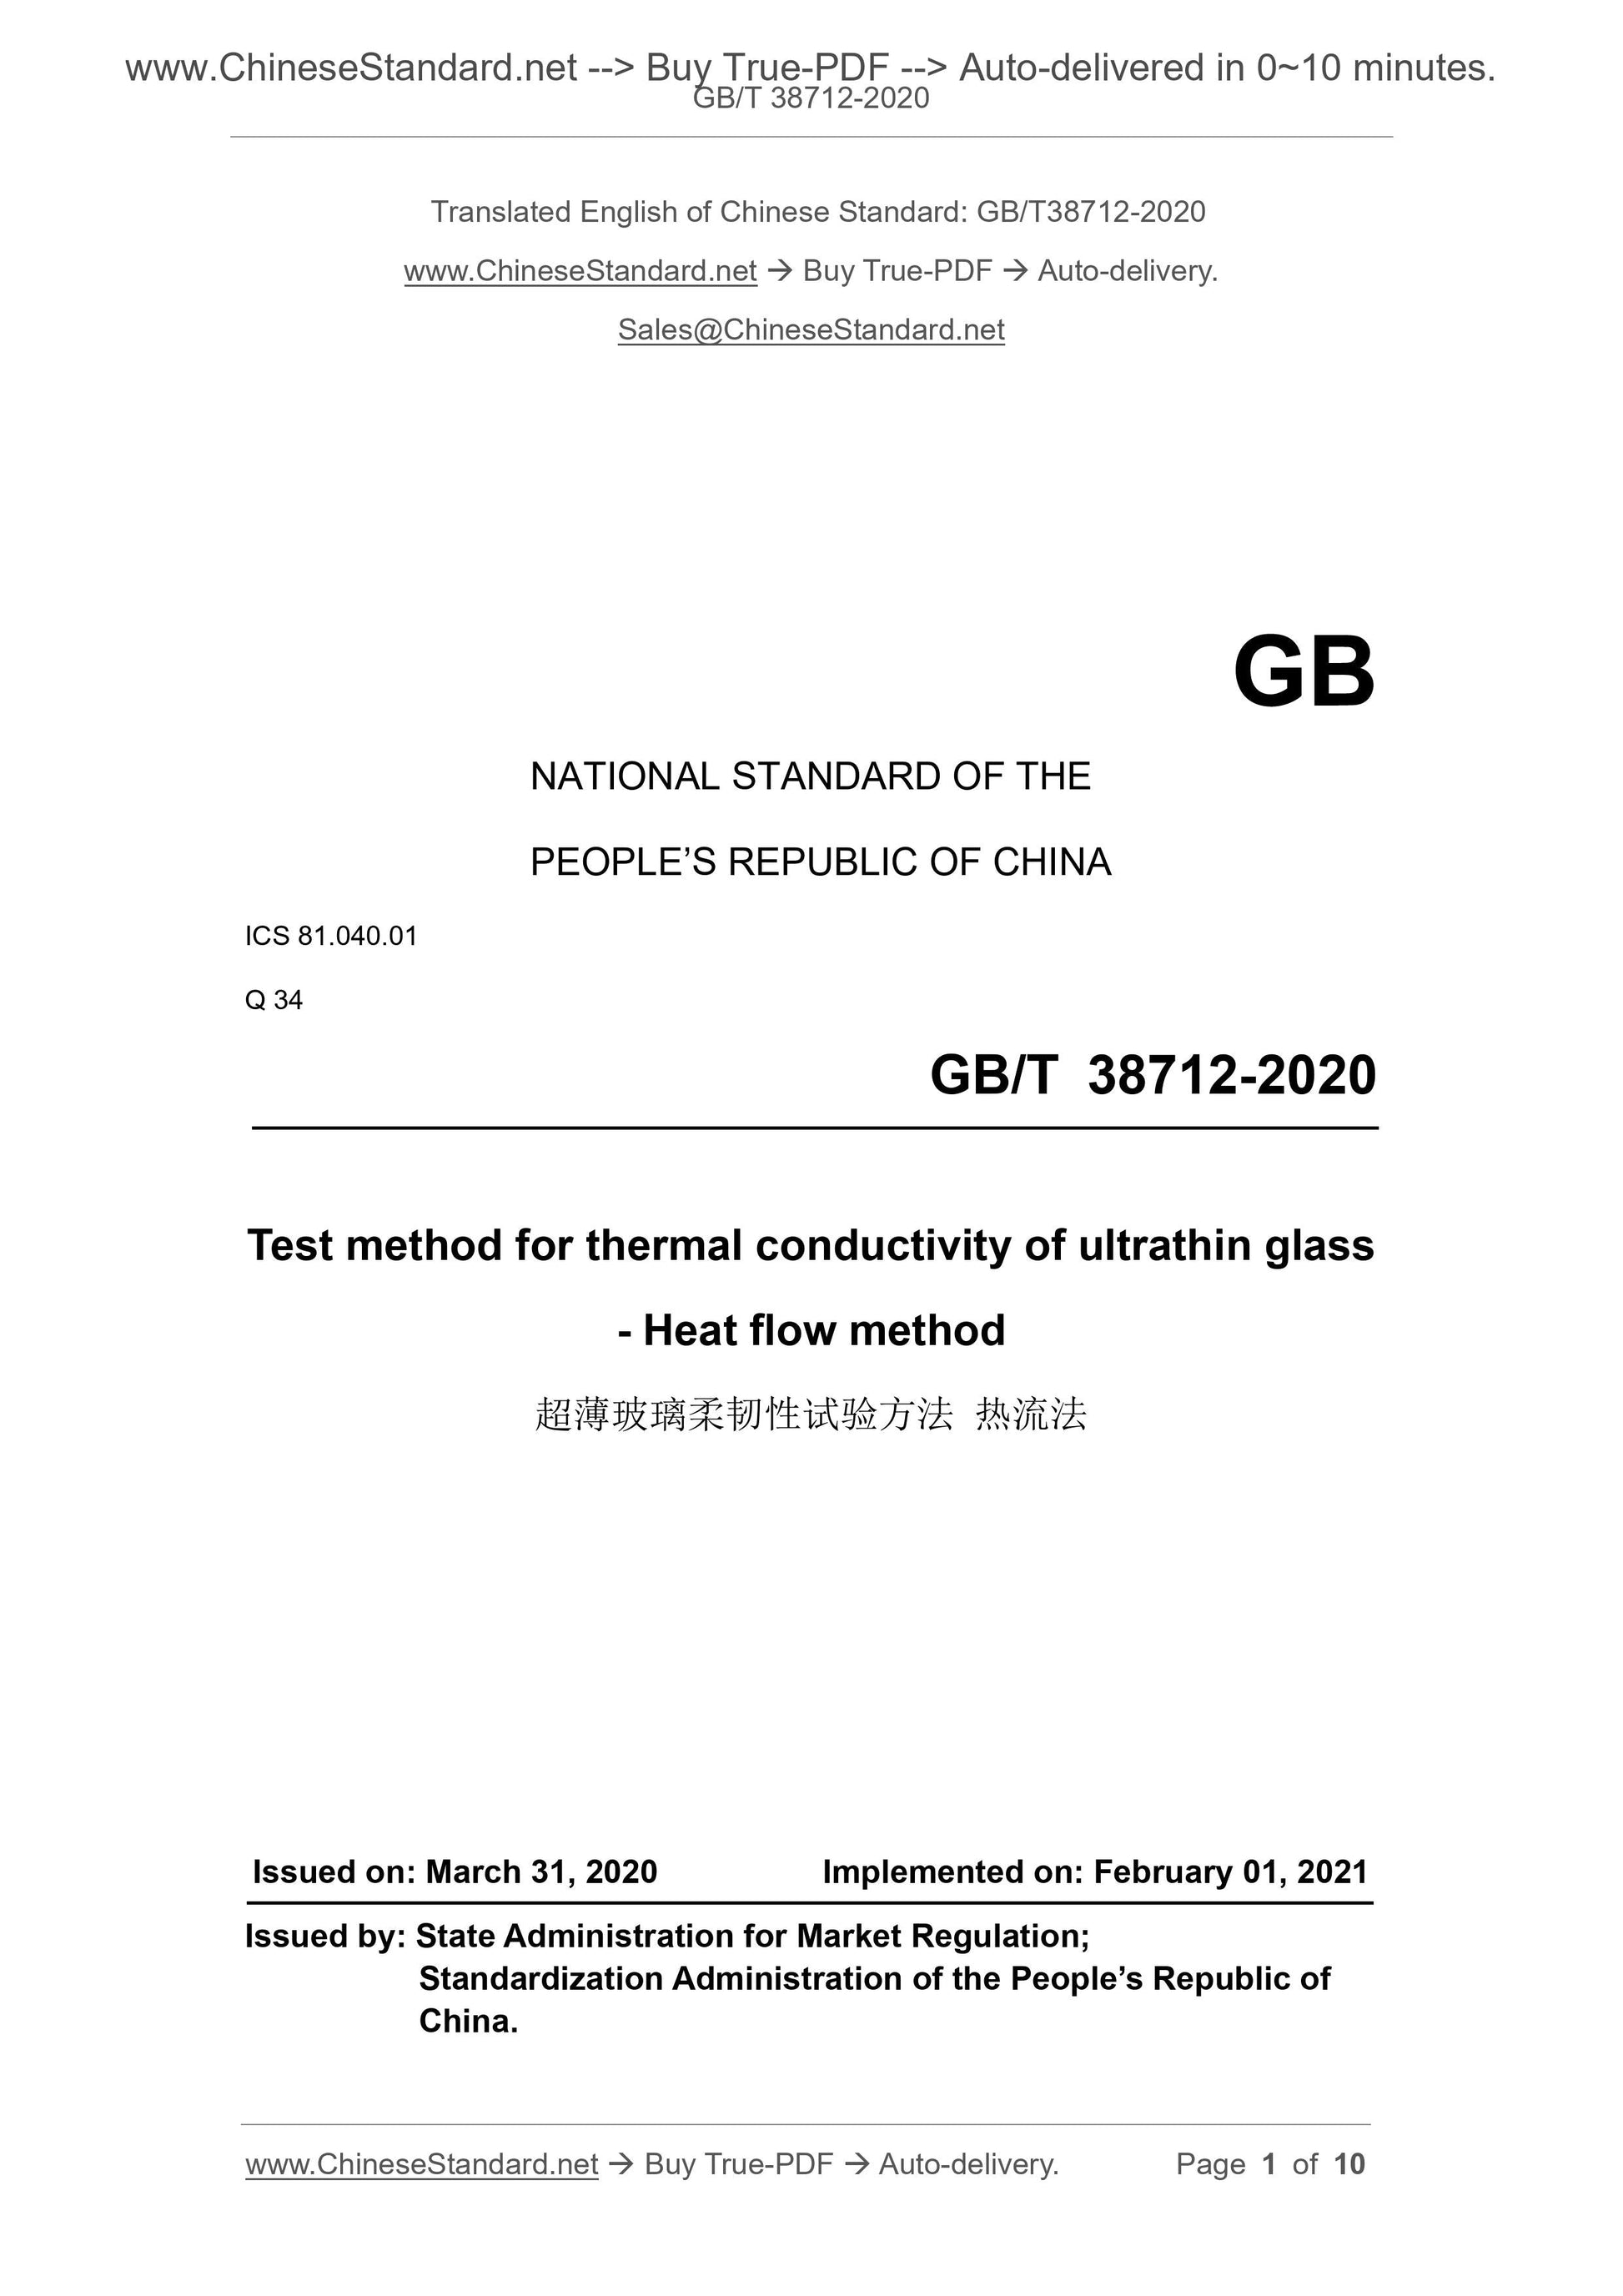 GB/T 38712-2020 Page 1